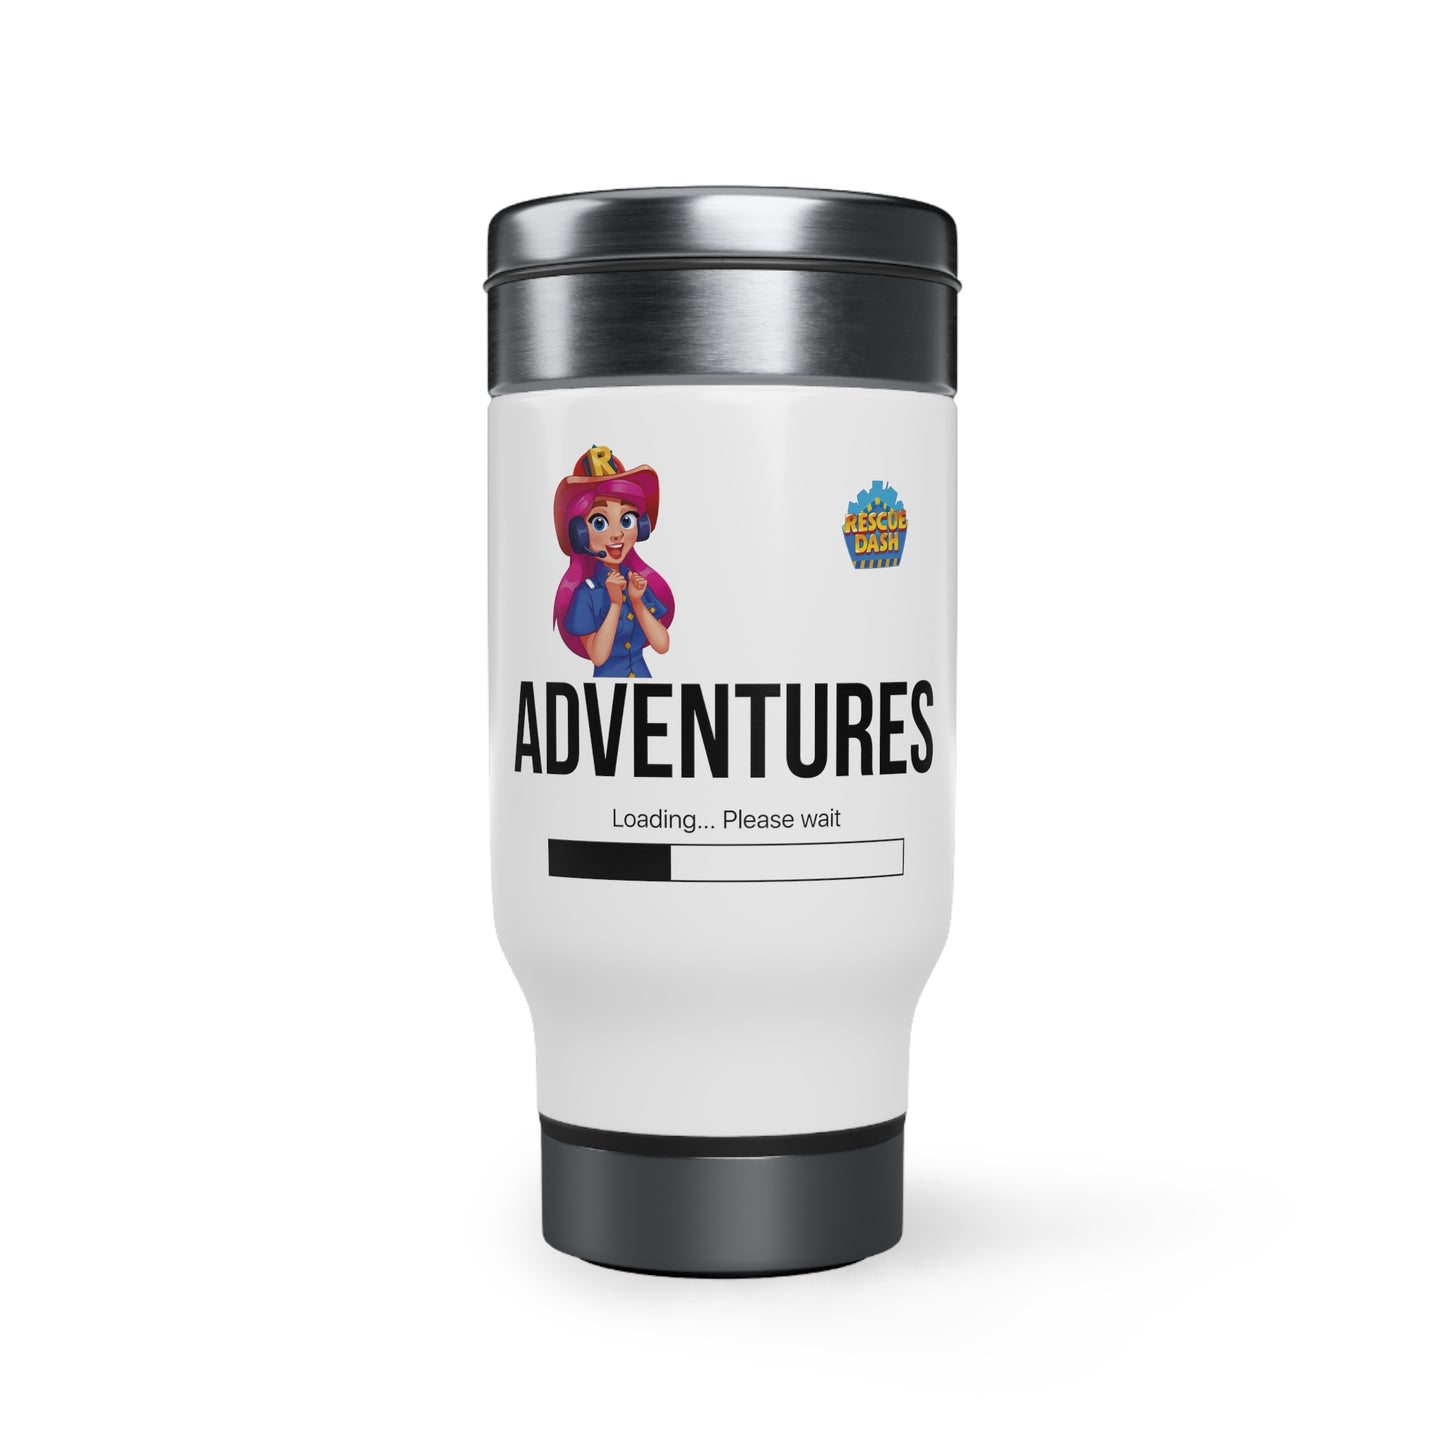 Rescue Dash Stainless Steel Travel Mug with Handle, 14oz